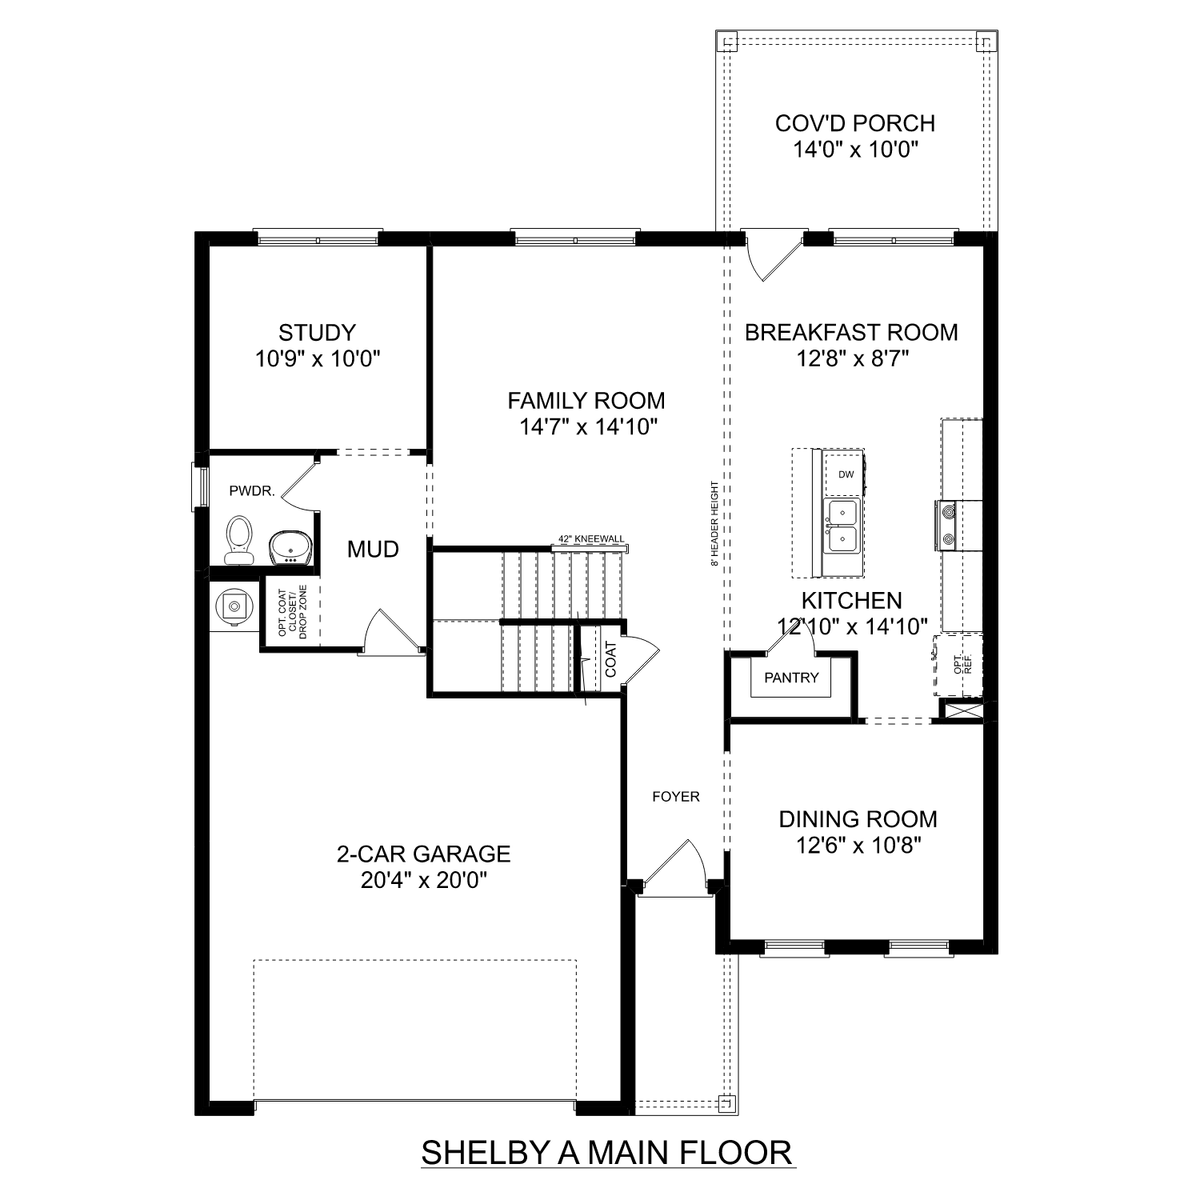 1 - The Shelby A buildable floor plan layout in Davidson Homes' Ivy Hills community.